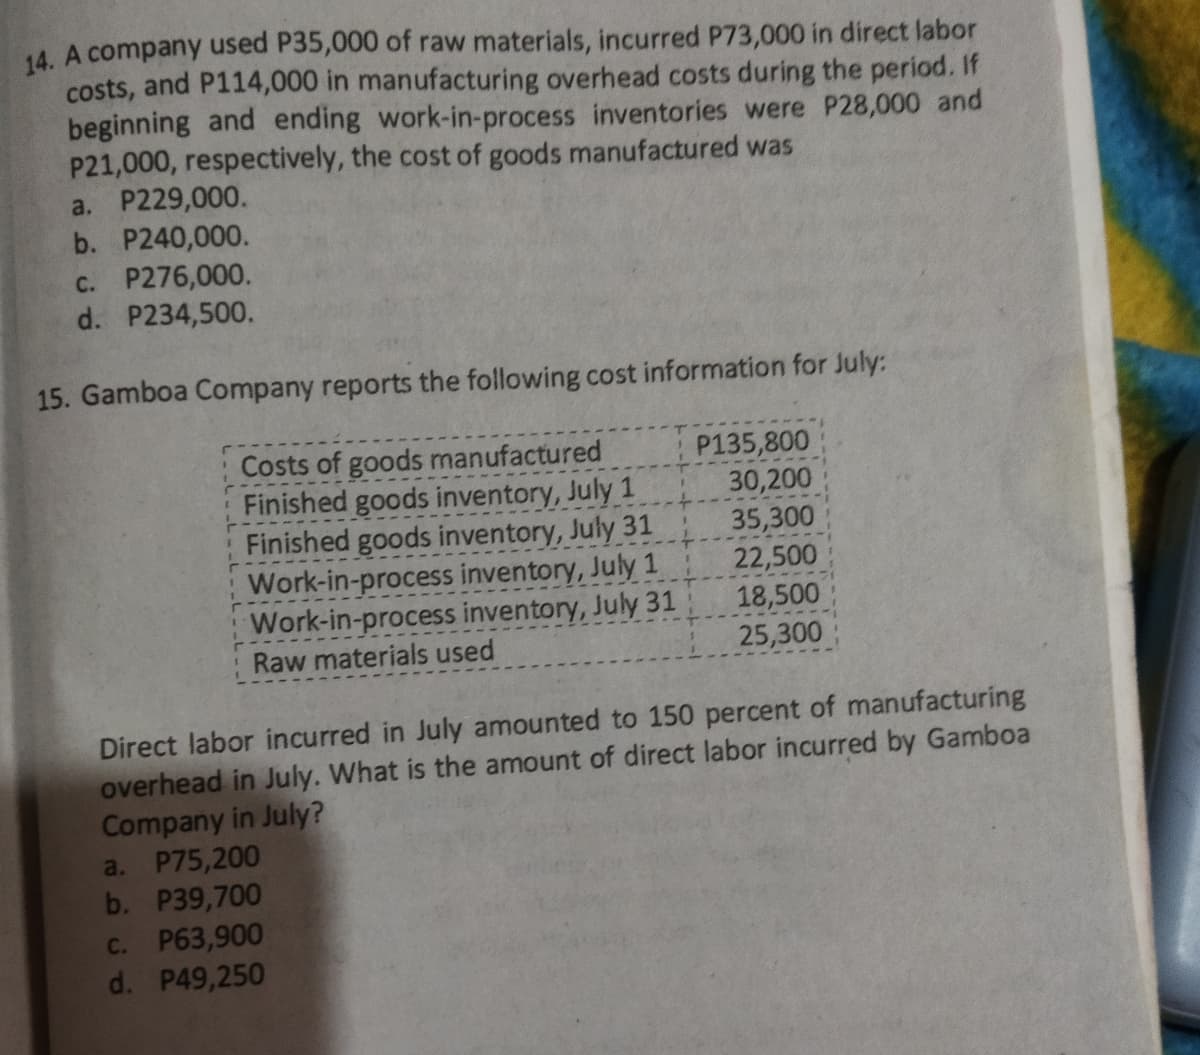 14. A company used P35,000 of raw materials, incurred P73,000 in direct labor
costs, and P114,000 in manufacturing overhead costs during the period. If
beginning and ending work-in-process inventories were P28,000 and
P21,000, respectively, the cost of goods manufactured was
a. P229,000.
b. P240,000.
c. P276,000.
d. P234,500.
15. Gamboa Company reports the following cost information for July:
Costs of goods manufactured
Finished goods inventory, July 1
Finished goods inventory, July 31
Work-in-process inventory, July 1
Work-in-process inventory, July 31
P135,800
30,200
35,300
22,500
18,500
25,300
Raw materials used
Direct labor incurred in July amounted to 150 percent of manufacturing
overhead in July. What is the amount of direct labor incurred by Gamboa
Company in July?
a. P75,200
b. P39,700
C. P63,900
d. P49,250
